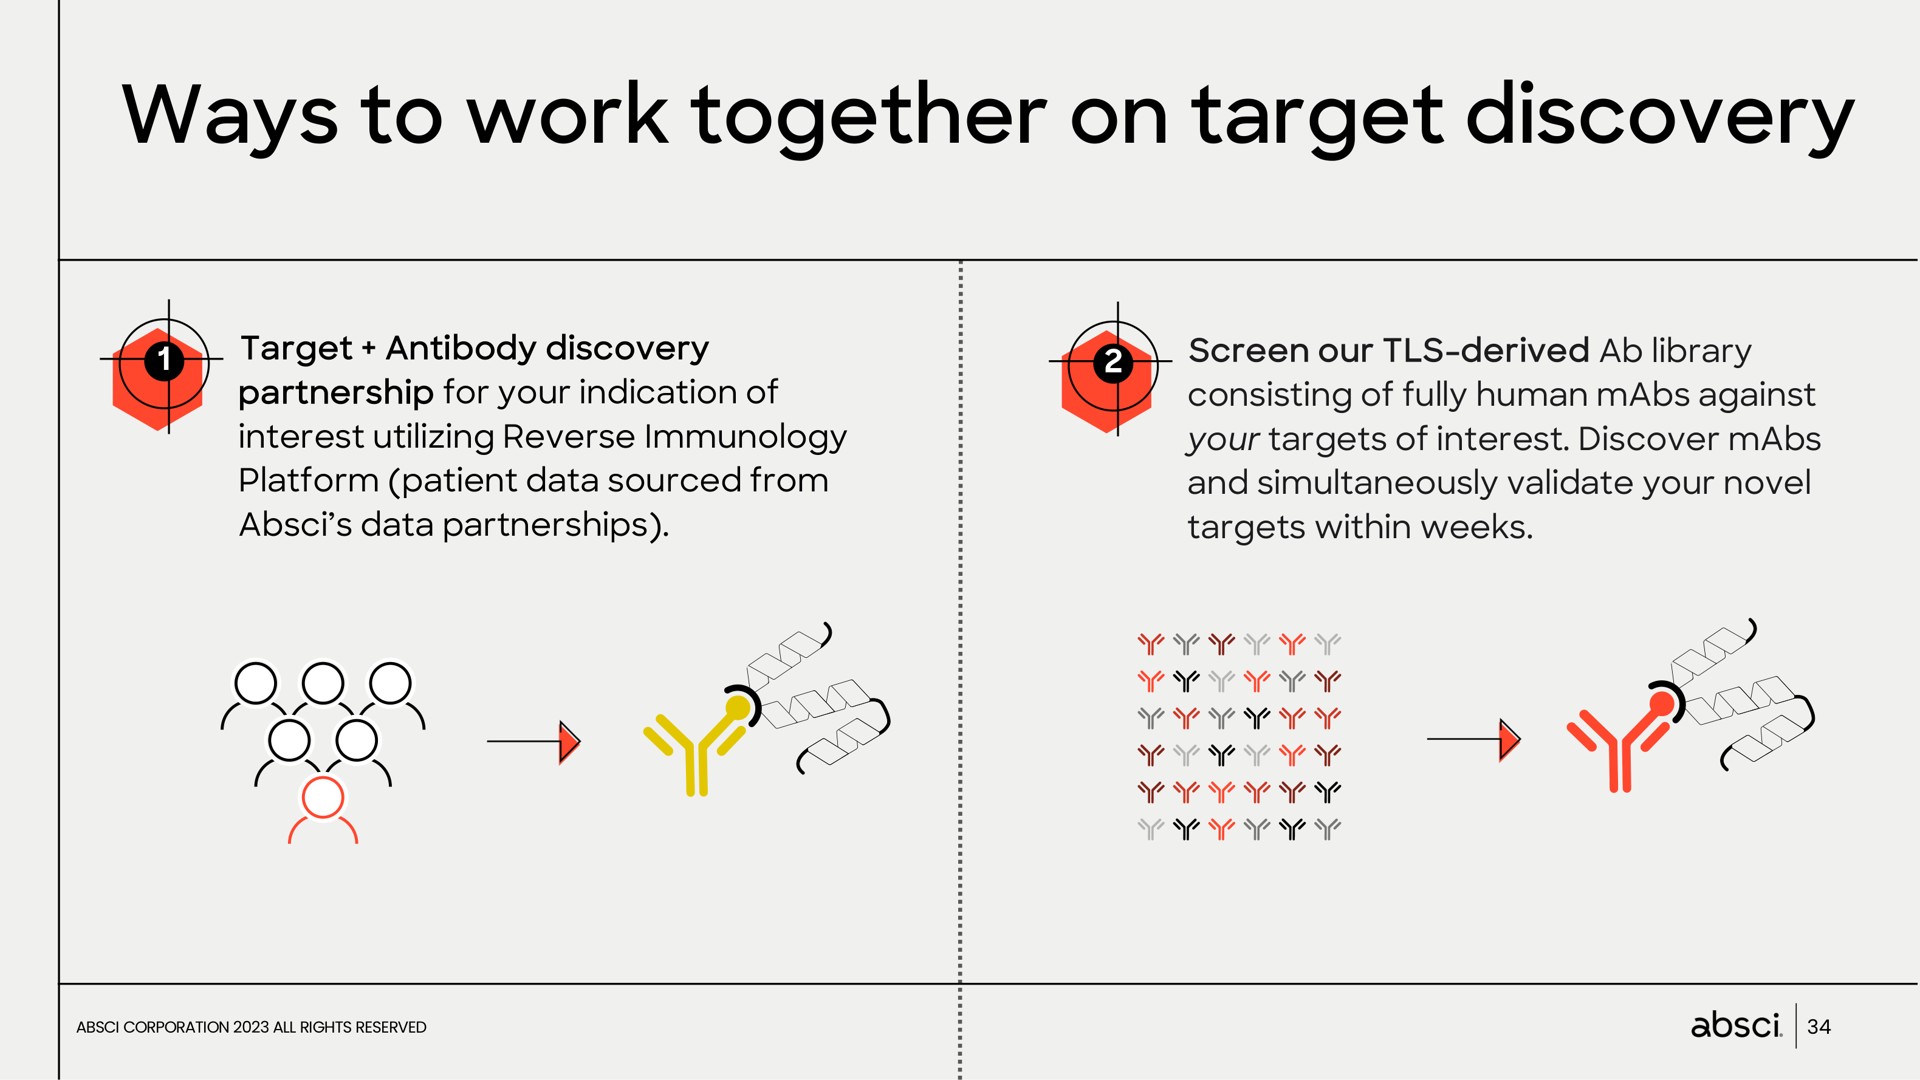 ways to work together on target discovery | Absci